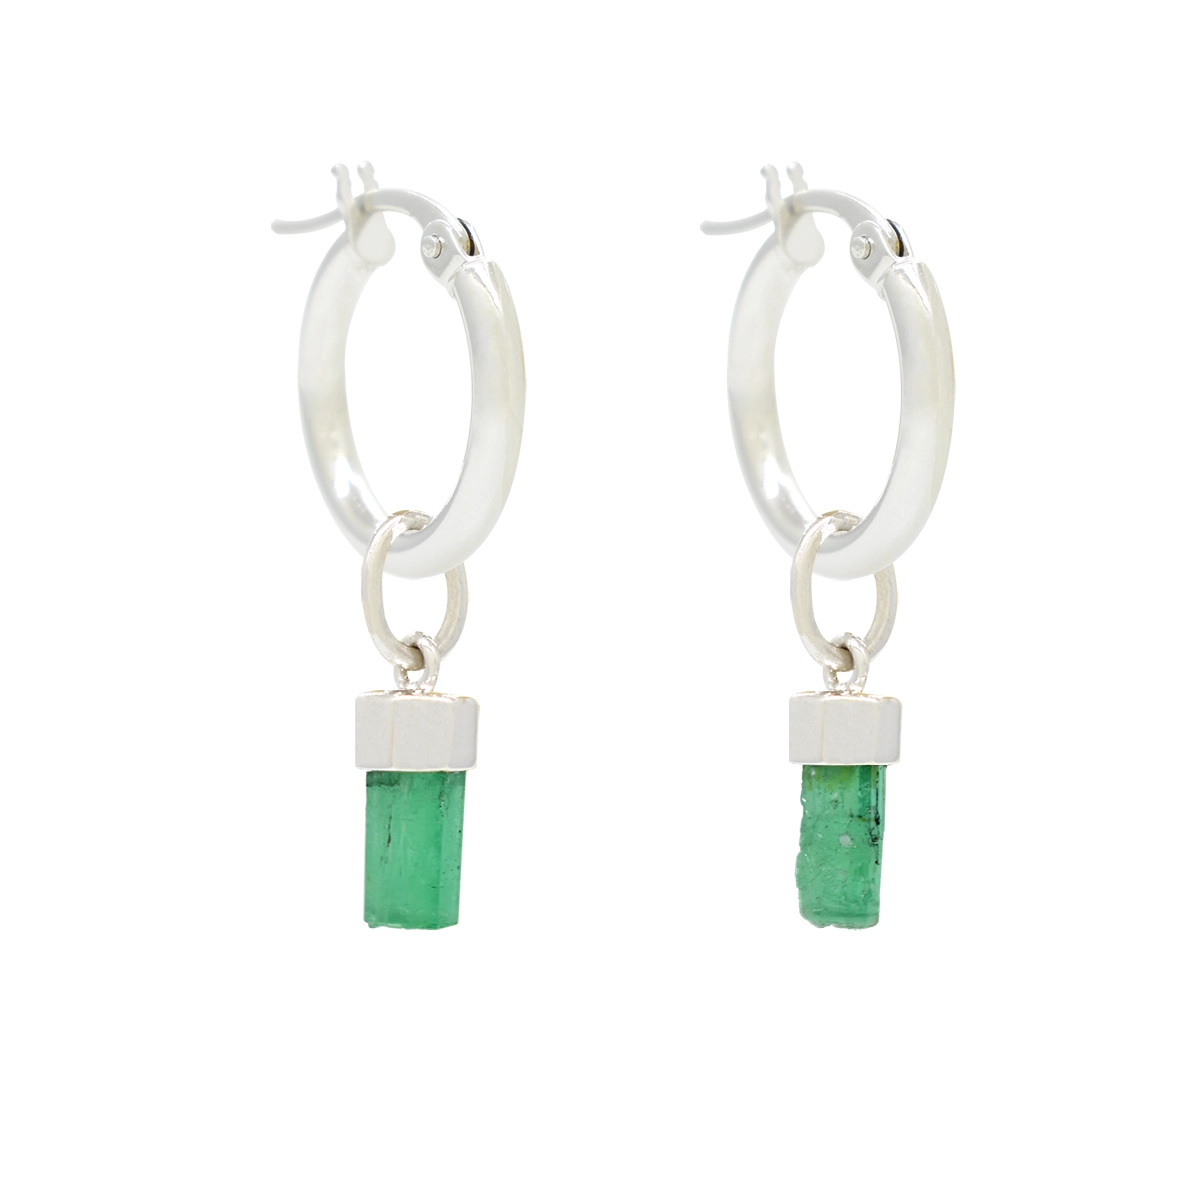 Emerald dangling earrings in 18K white gold hoops with 2 uncut natural Colombian emeralds in 1.72 carats total weight